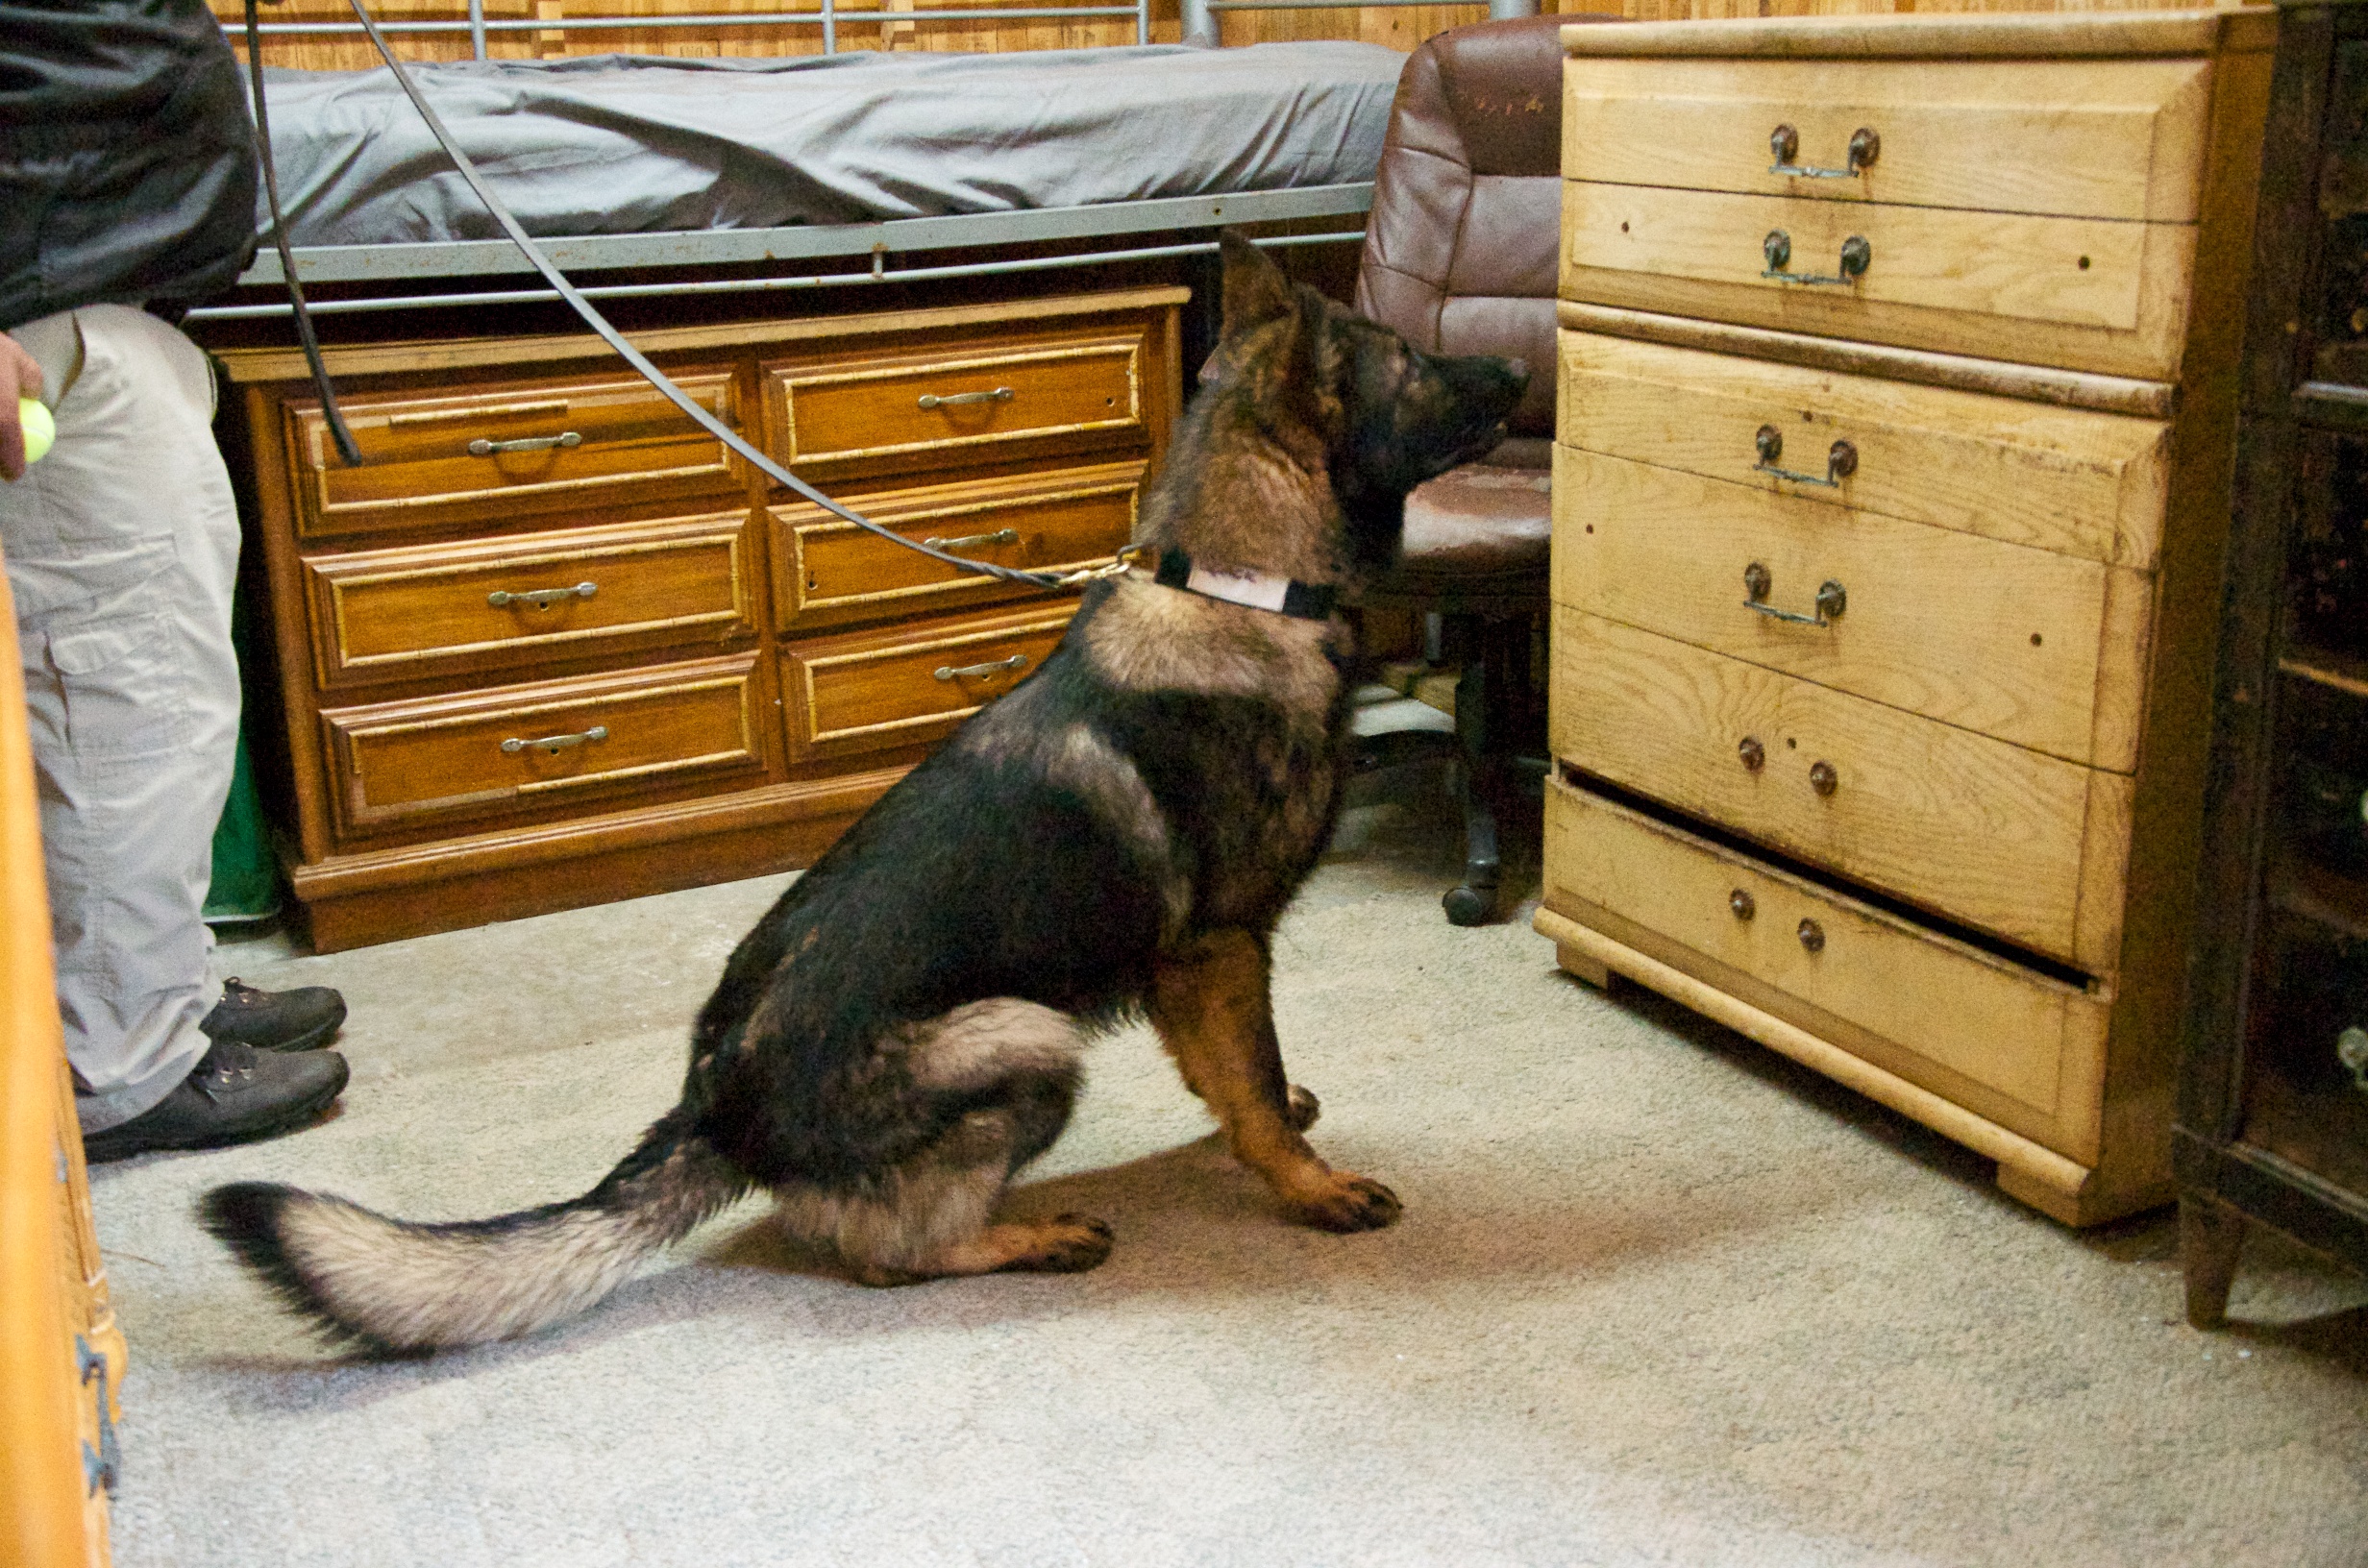 Drug detection dogs easily pick up traces of narcotics in closed drawers